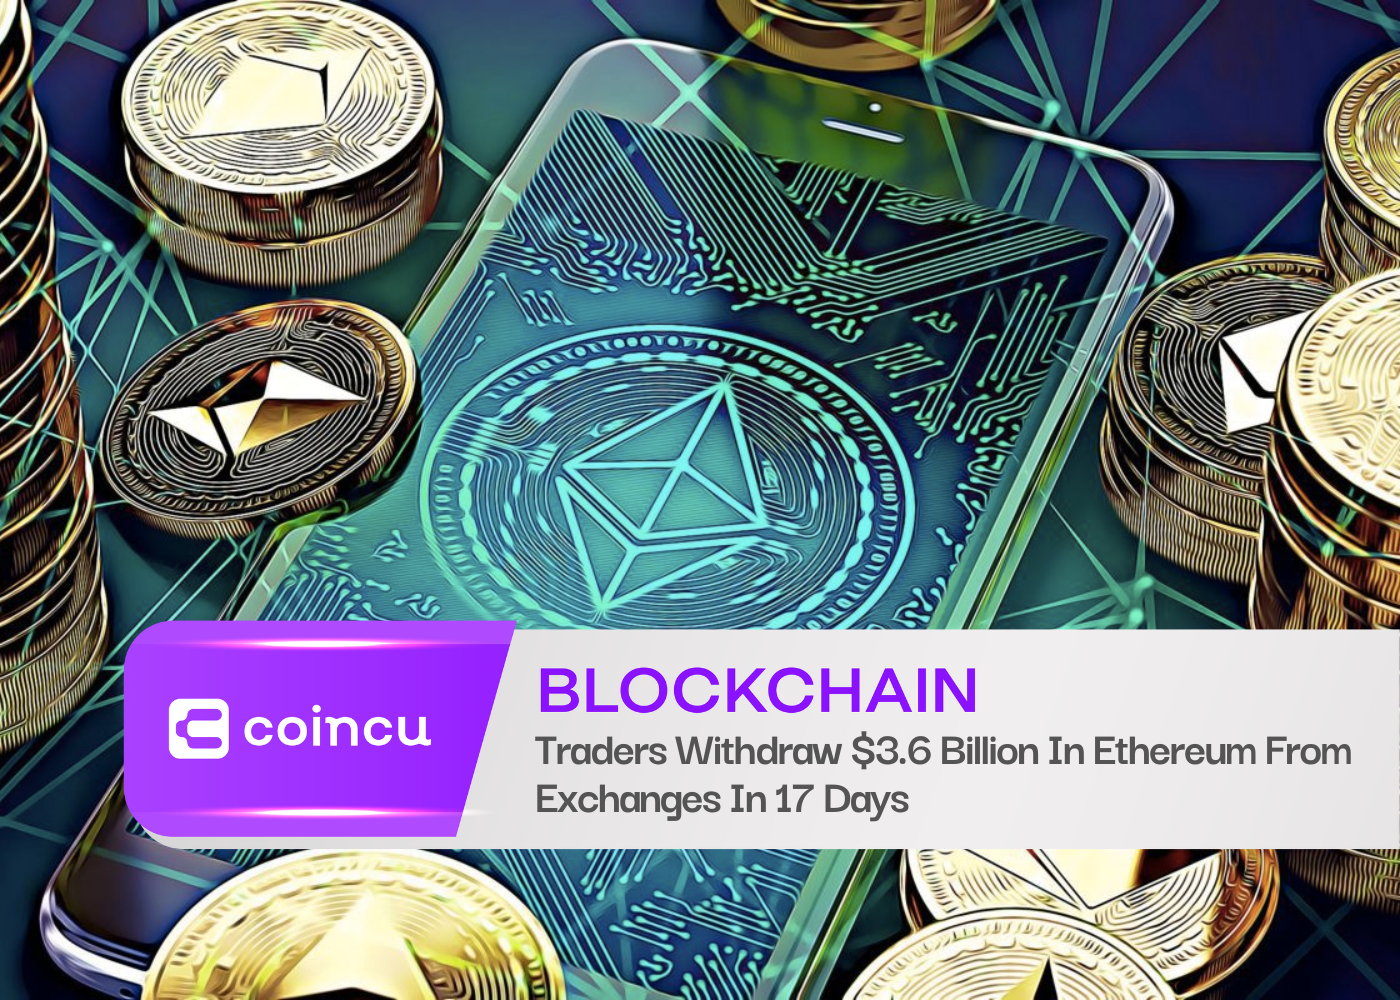 Traders Withdraw $3.6 Billion In Ethereum From Exchanges In 17 Days